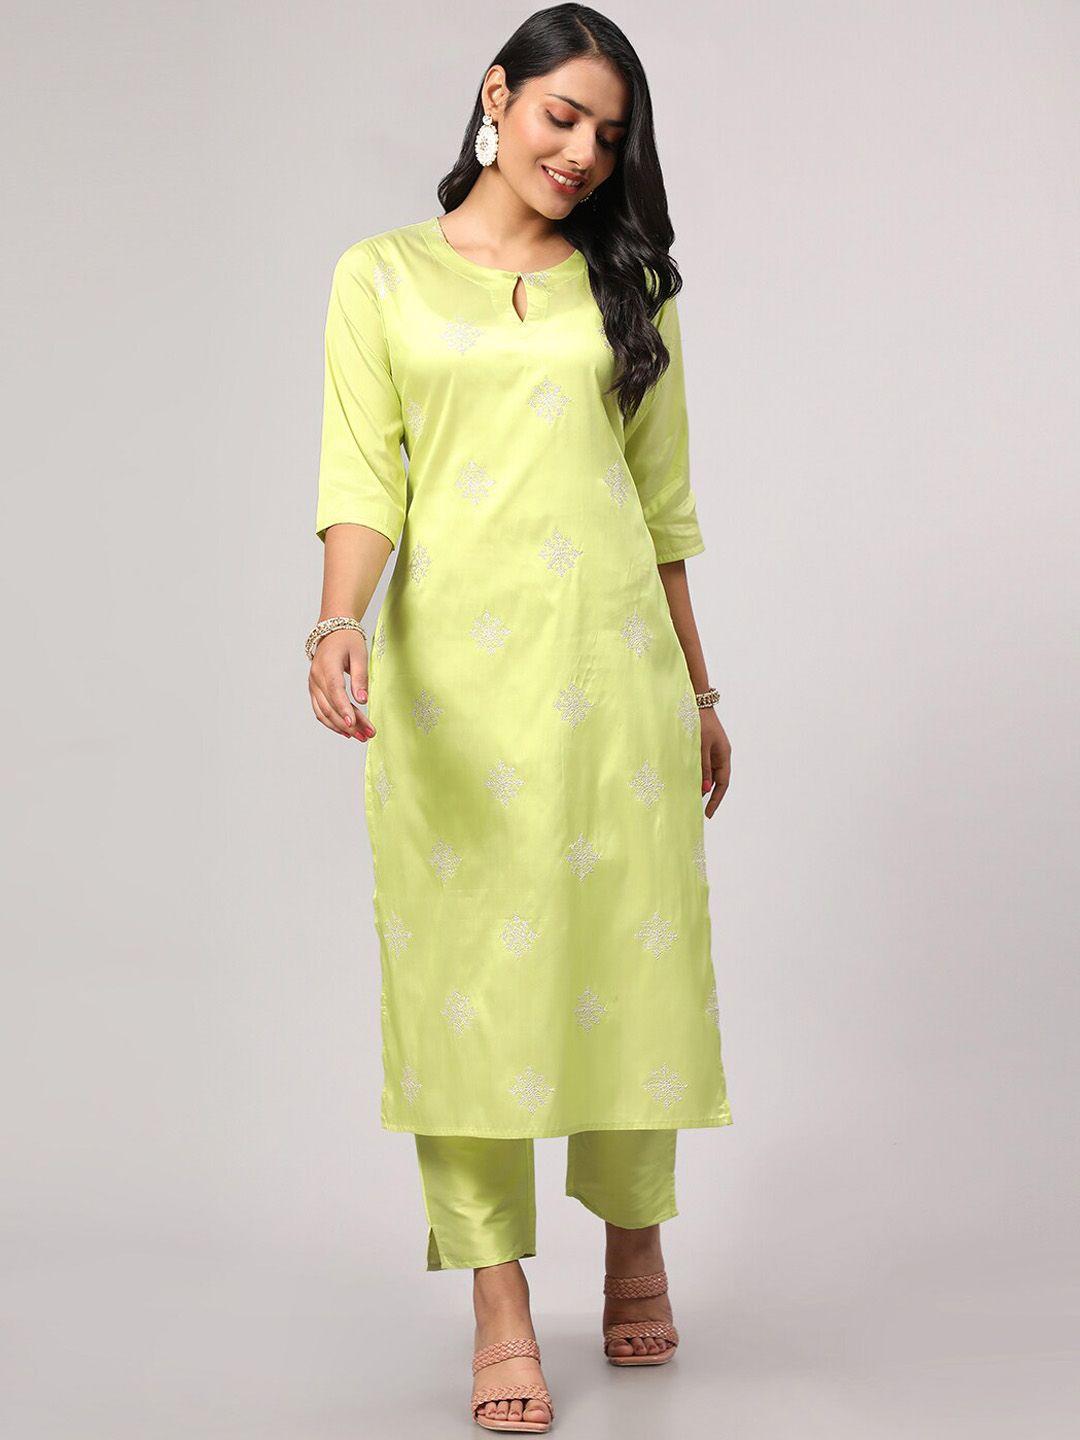 v tradition ethnic motif embroidered keyhole neck kurta with trousers